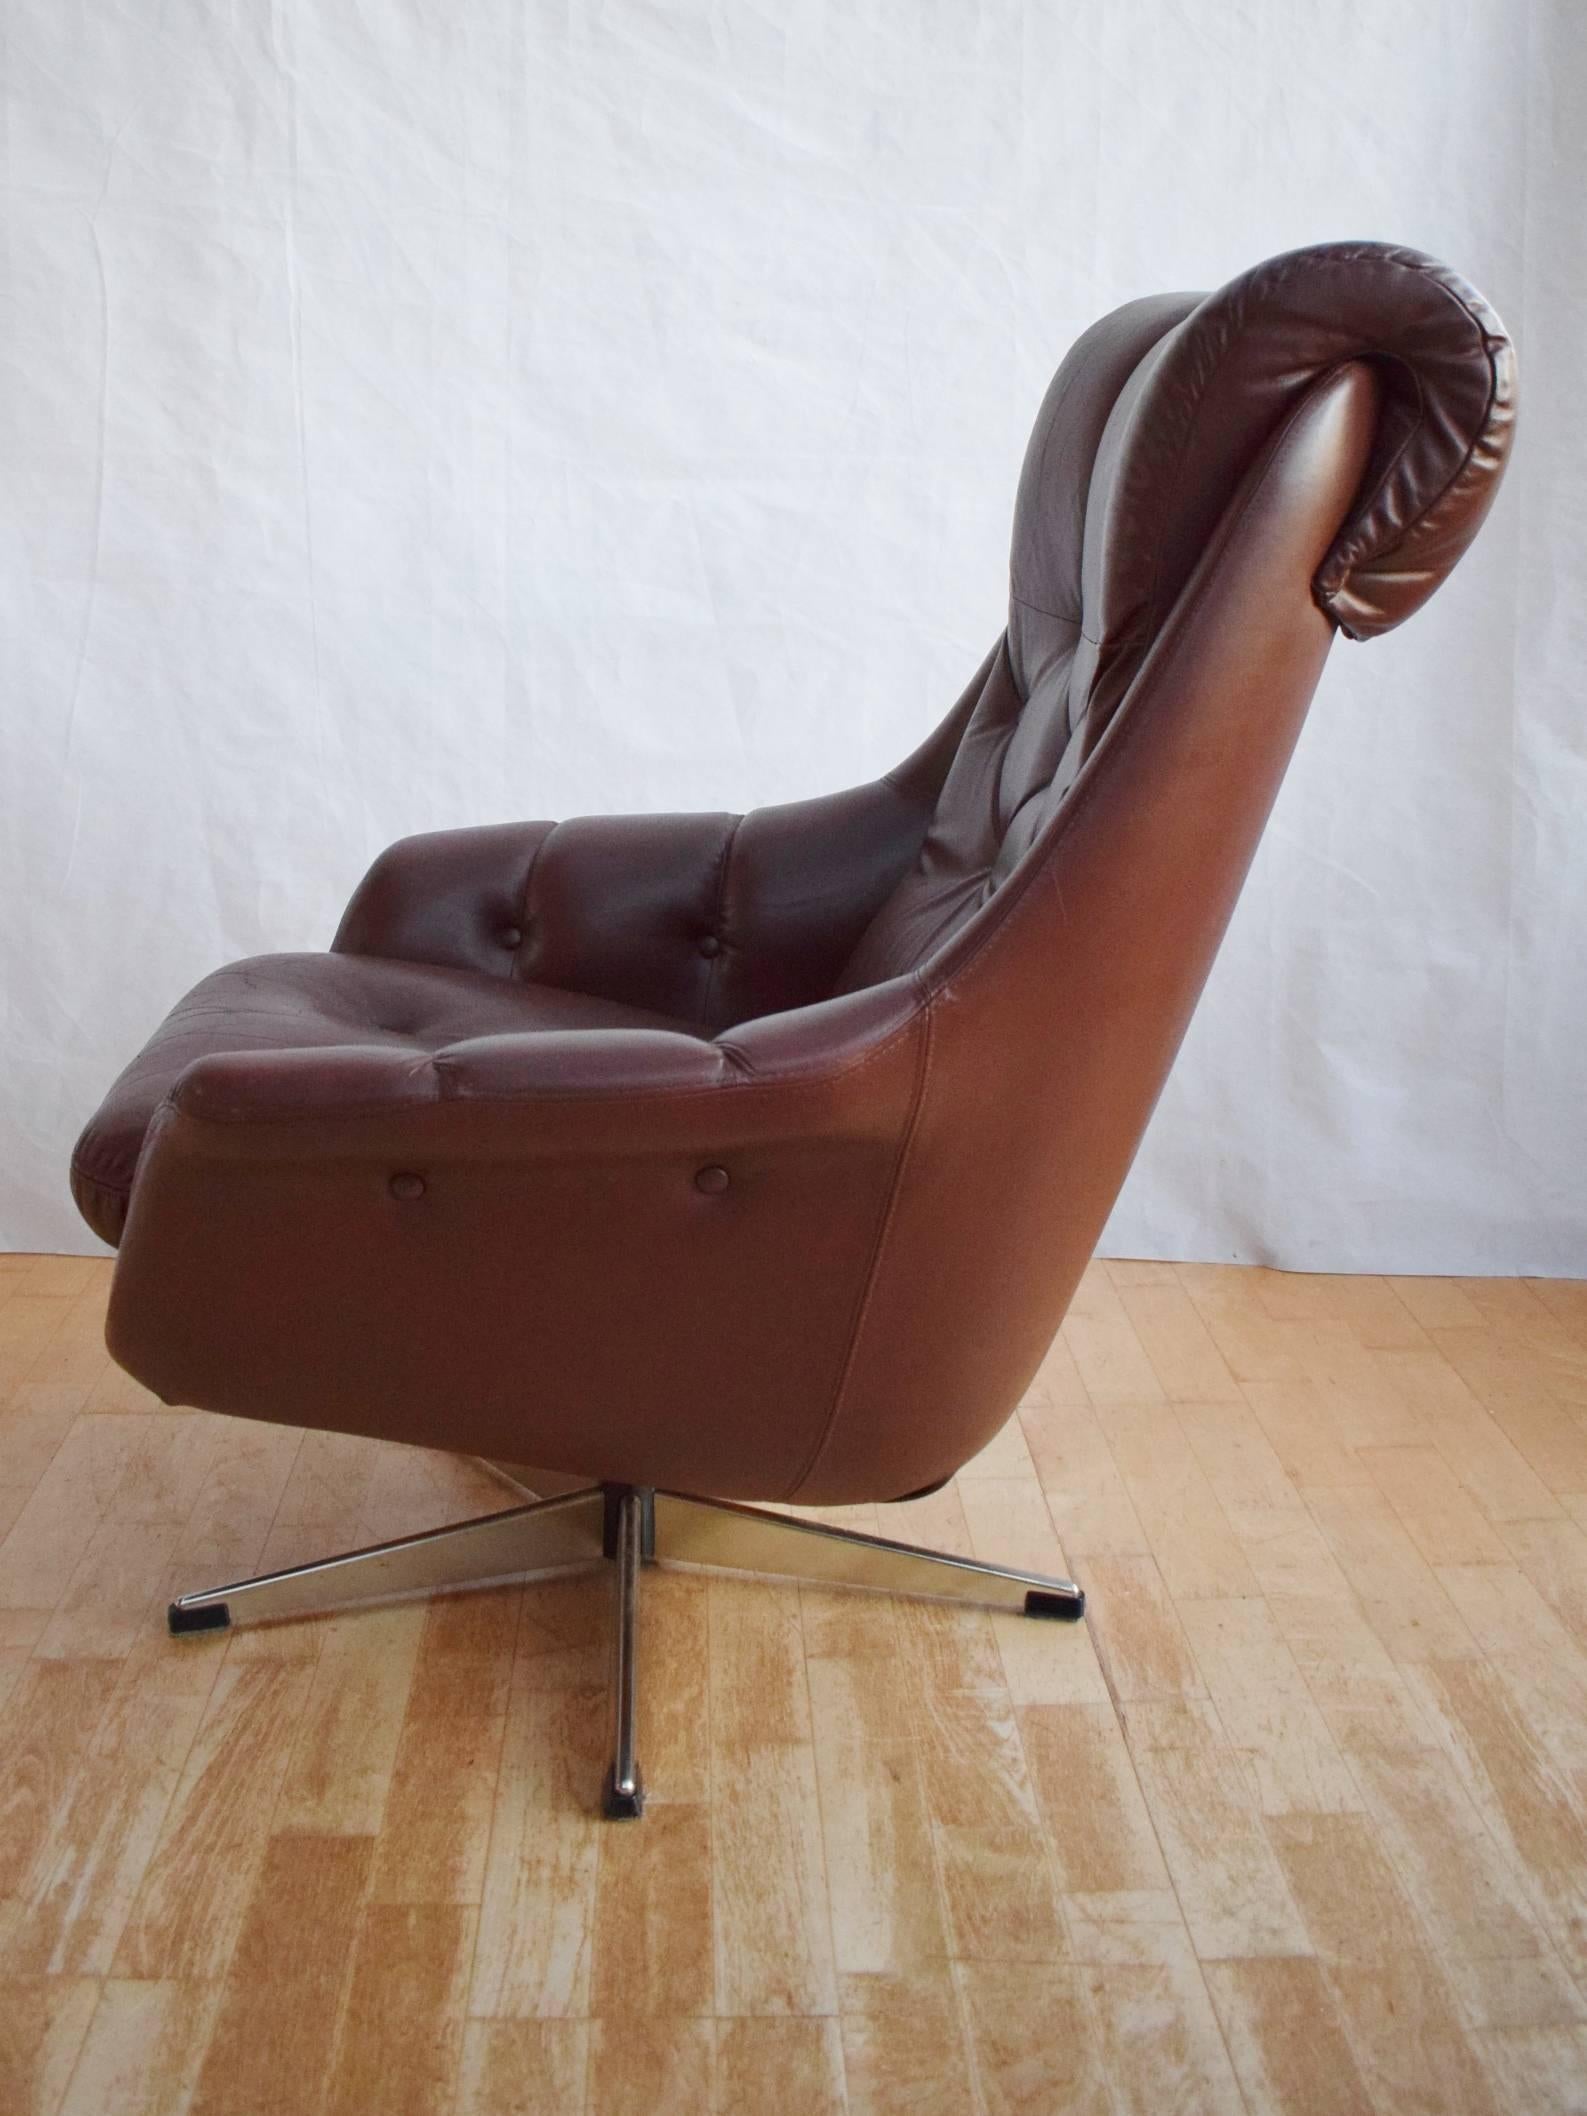 Designer: Danish Design

Manufacturer: Unknown

Country: Denmark

Date: 1970s

Material: Tan brown leather with metal swivel base

Maximum Dimensions: Width 80cm, depth 93cm, height 94cm and seat height 42cm

Condition: Very good, with